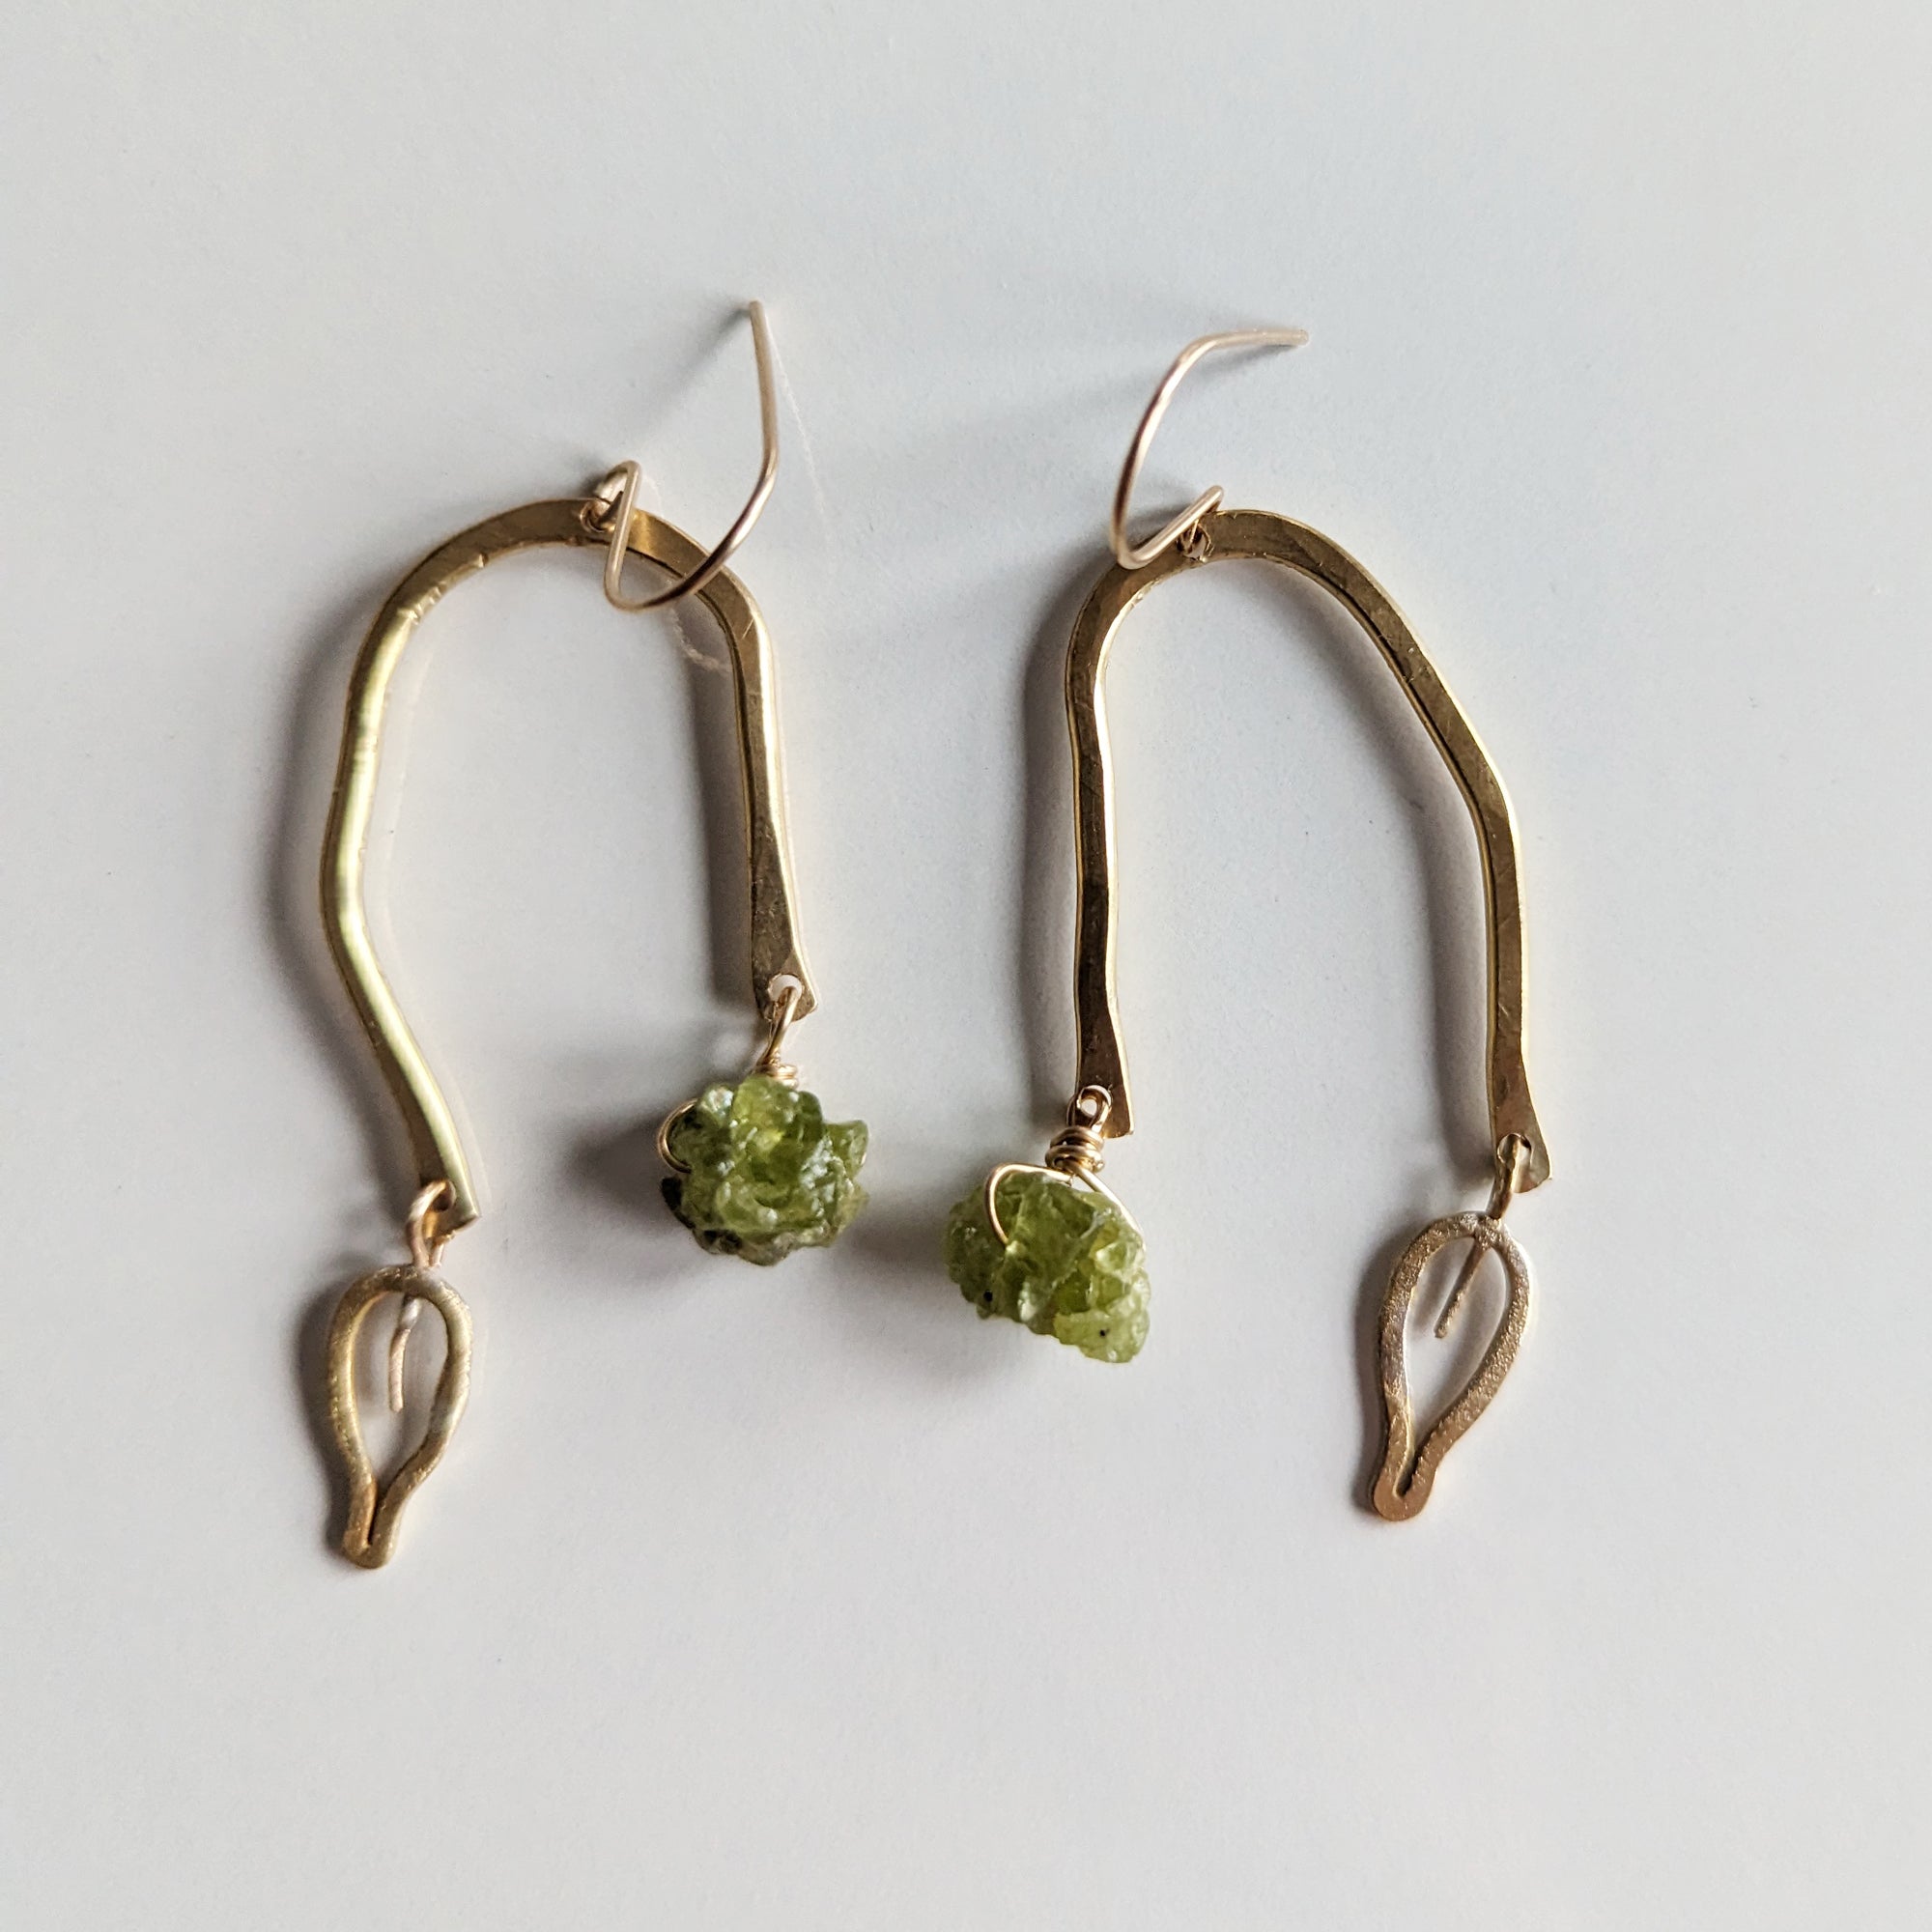 The Ivy Arch Earrings